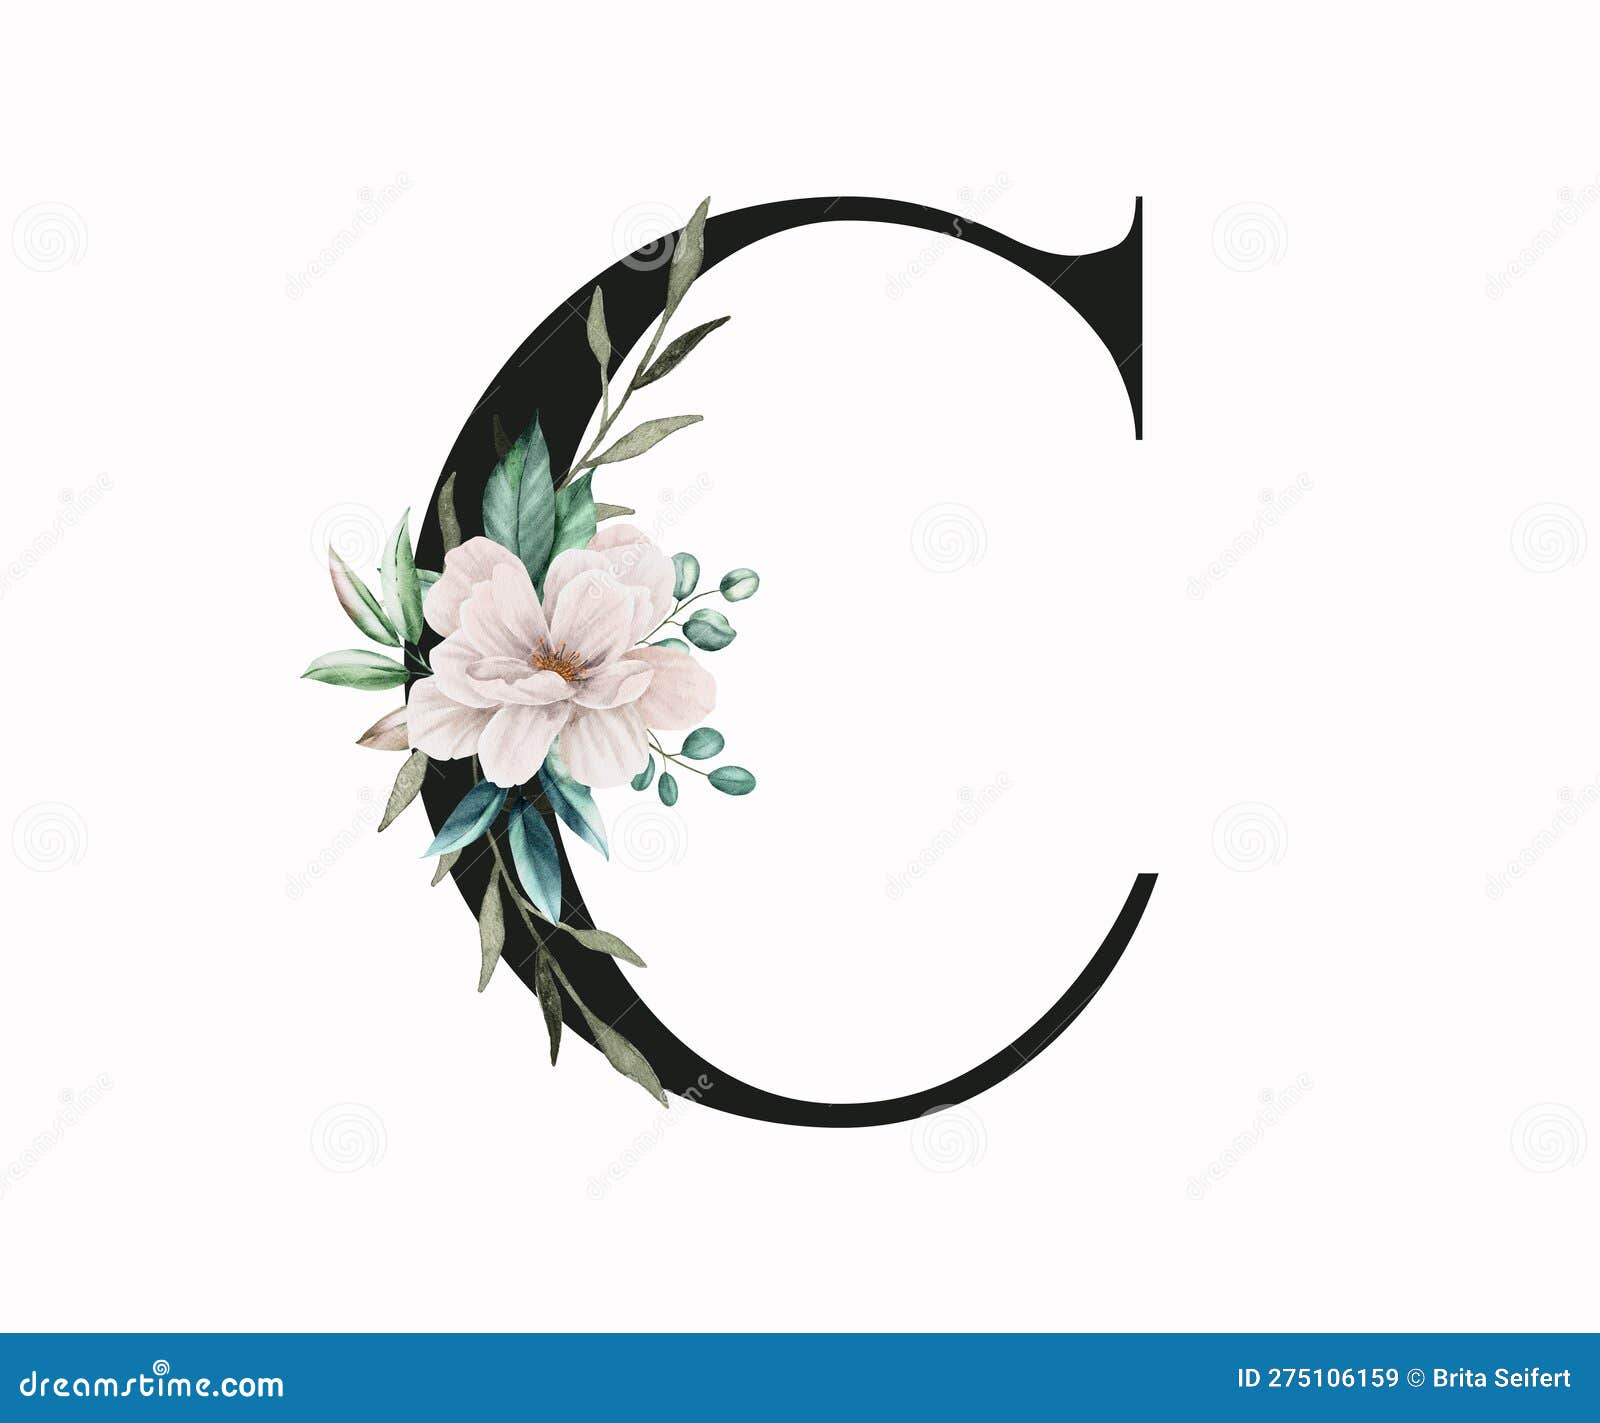 Capital Letter C Decorated with Green Leaves and Pansies. Letter of the ...